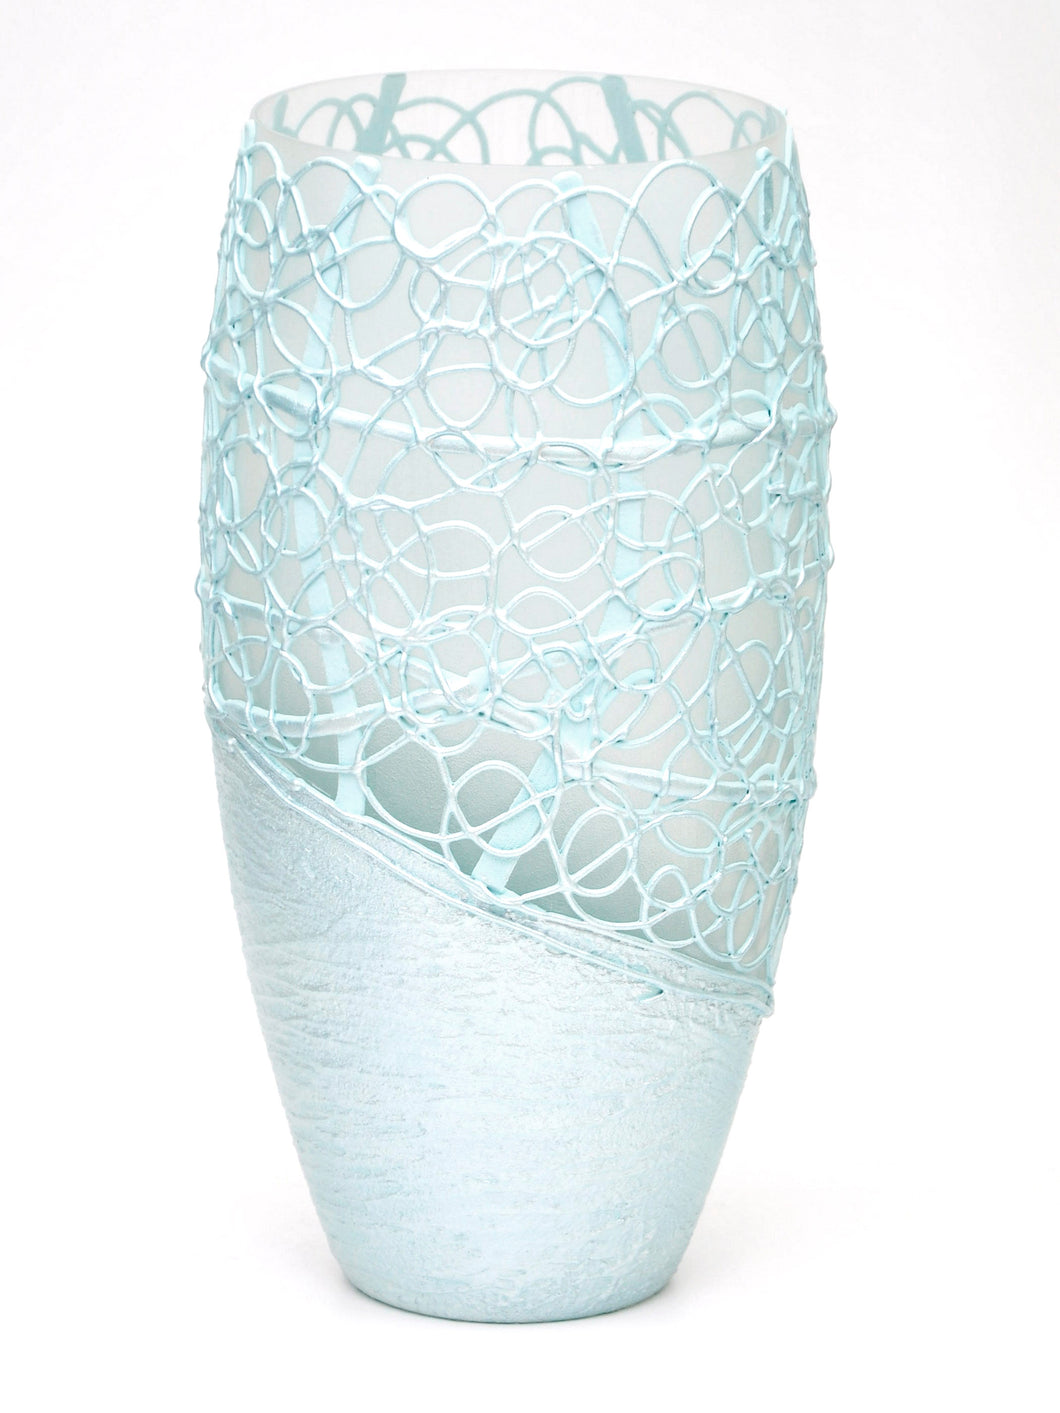 Glass vase 7518/300/sh125.1 - foxberryparkproducts